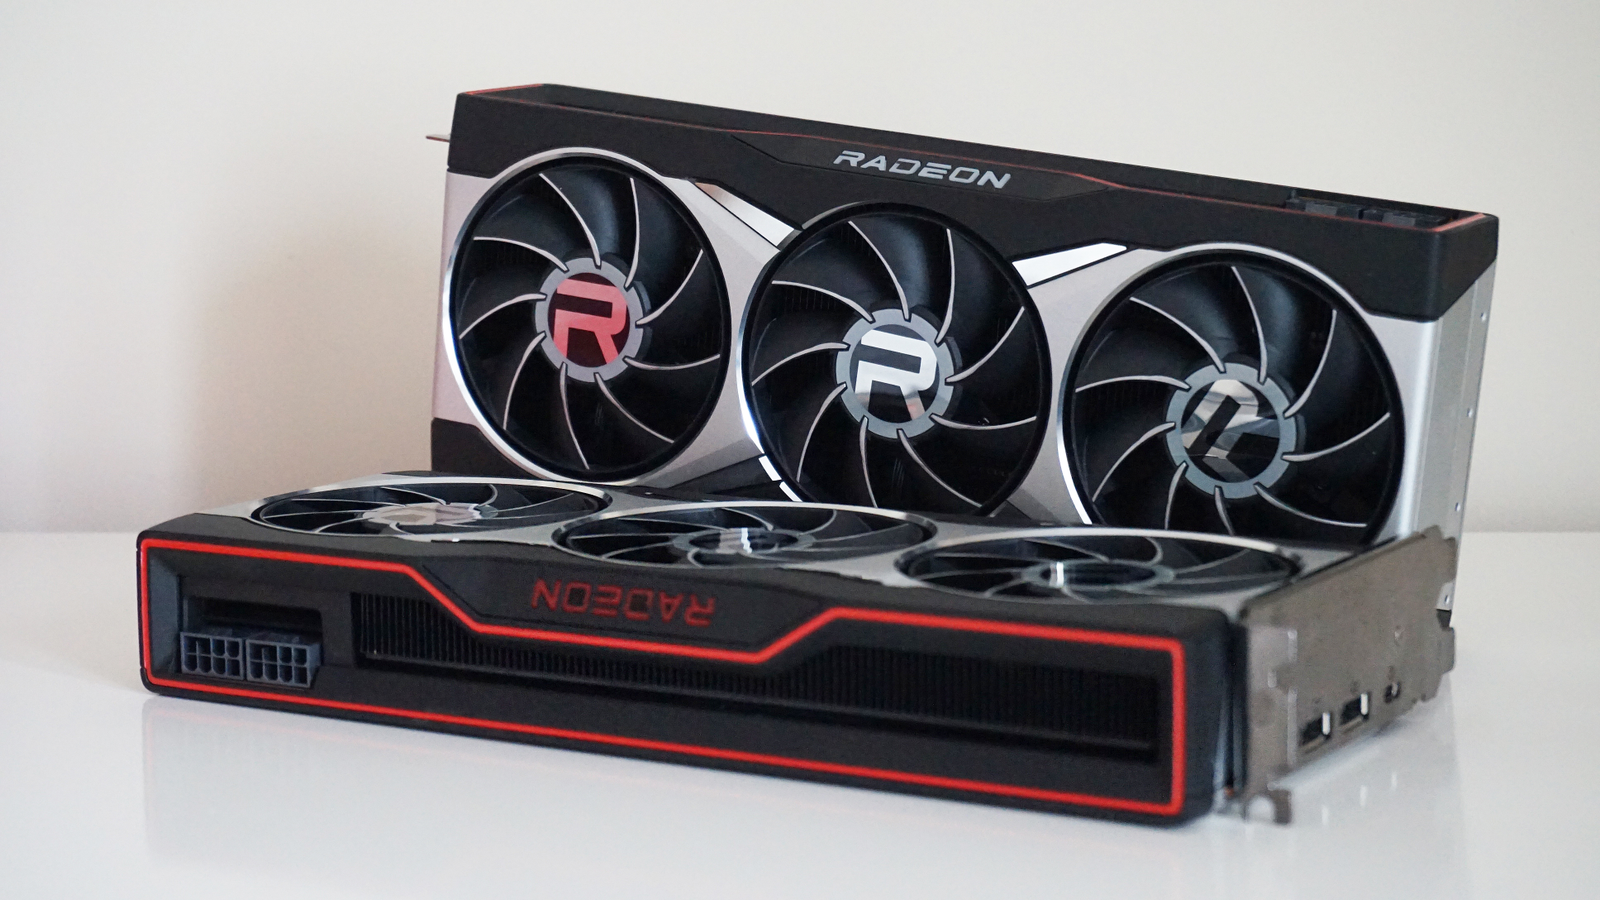 AMD Radeon RX 6800 XT Reference Edition Gaming Graphics Card